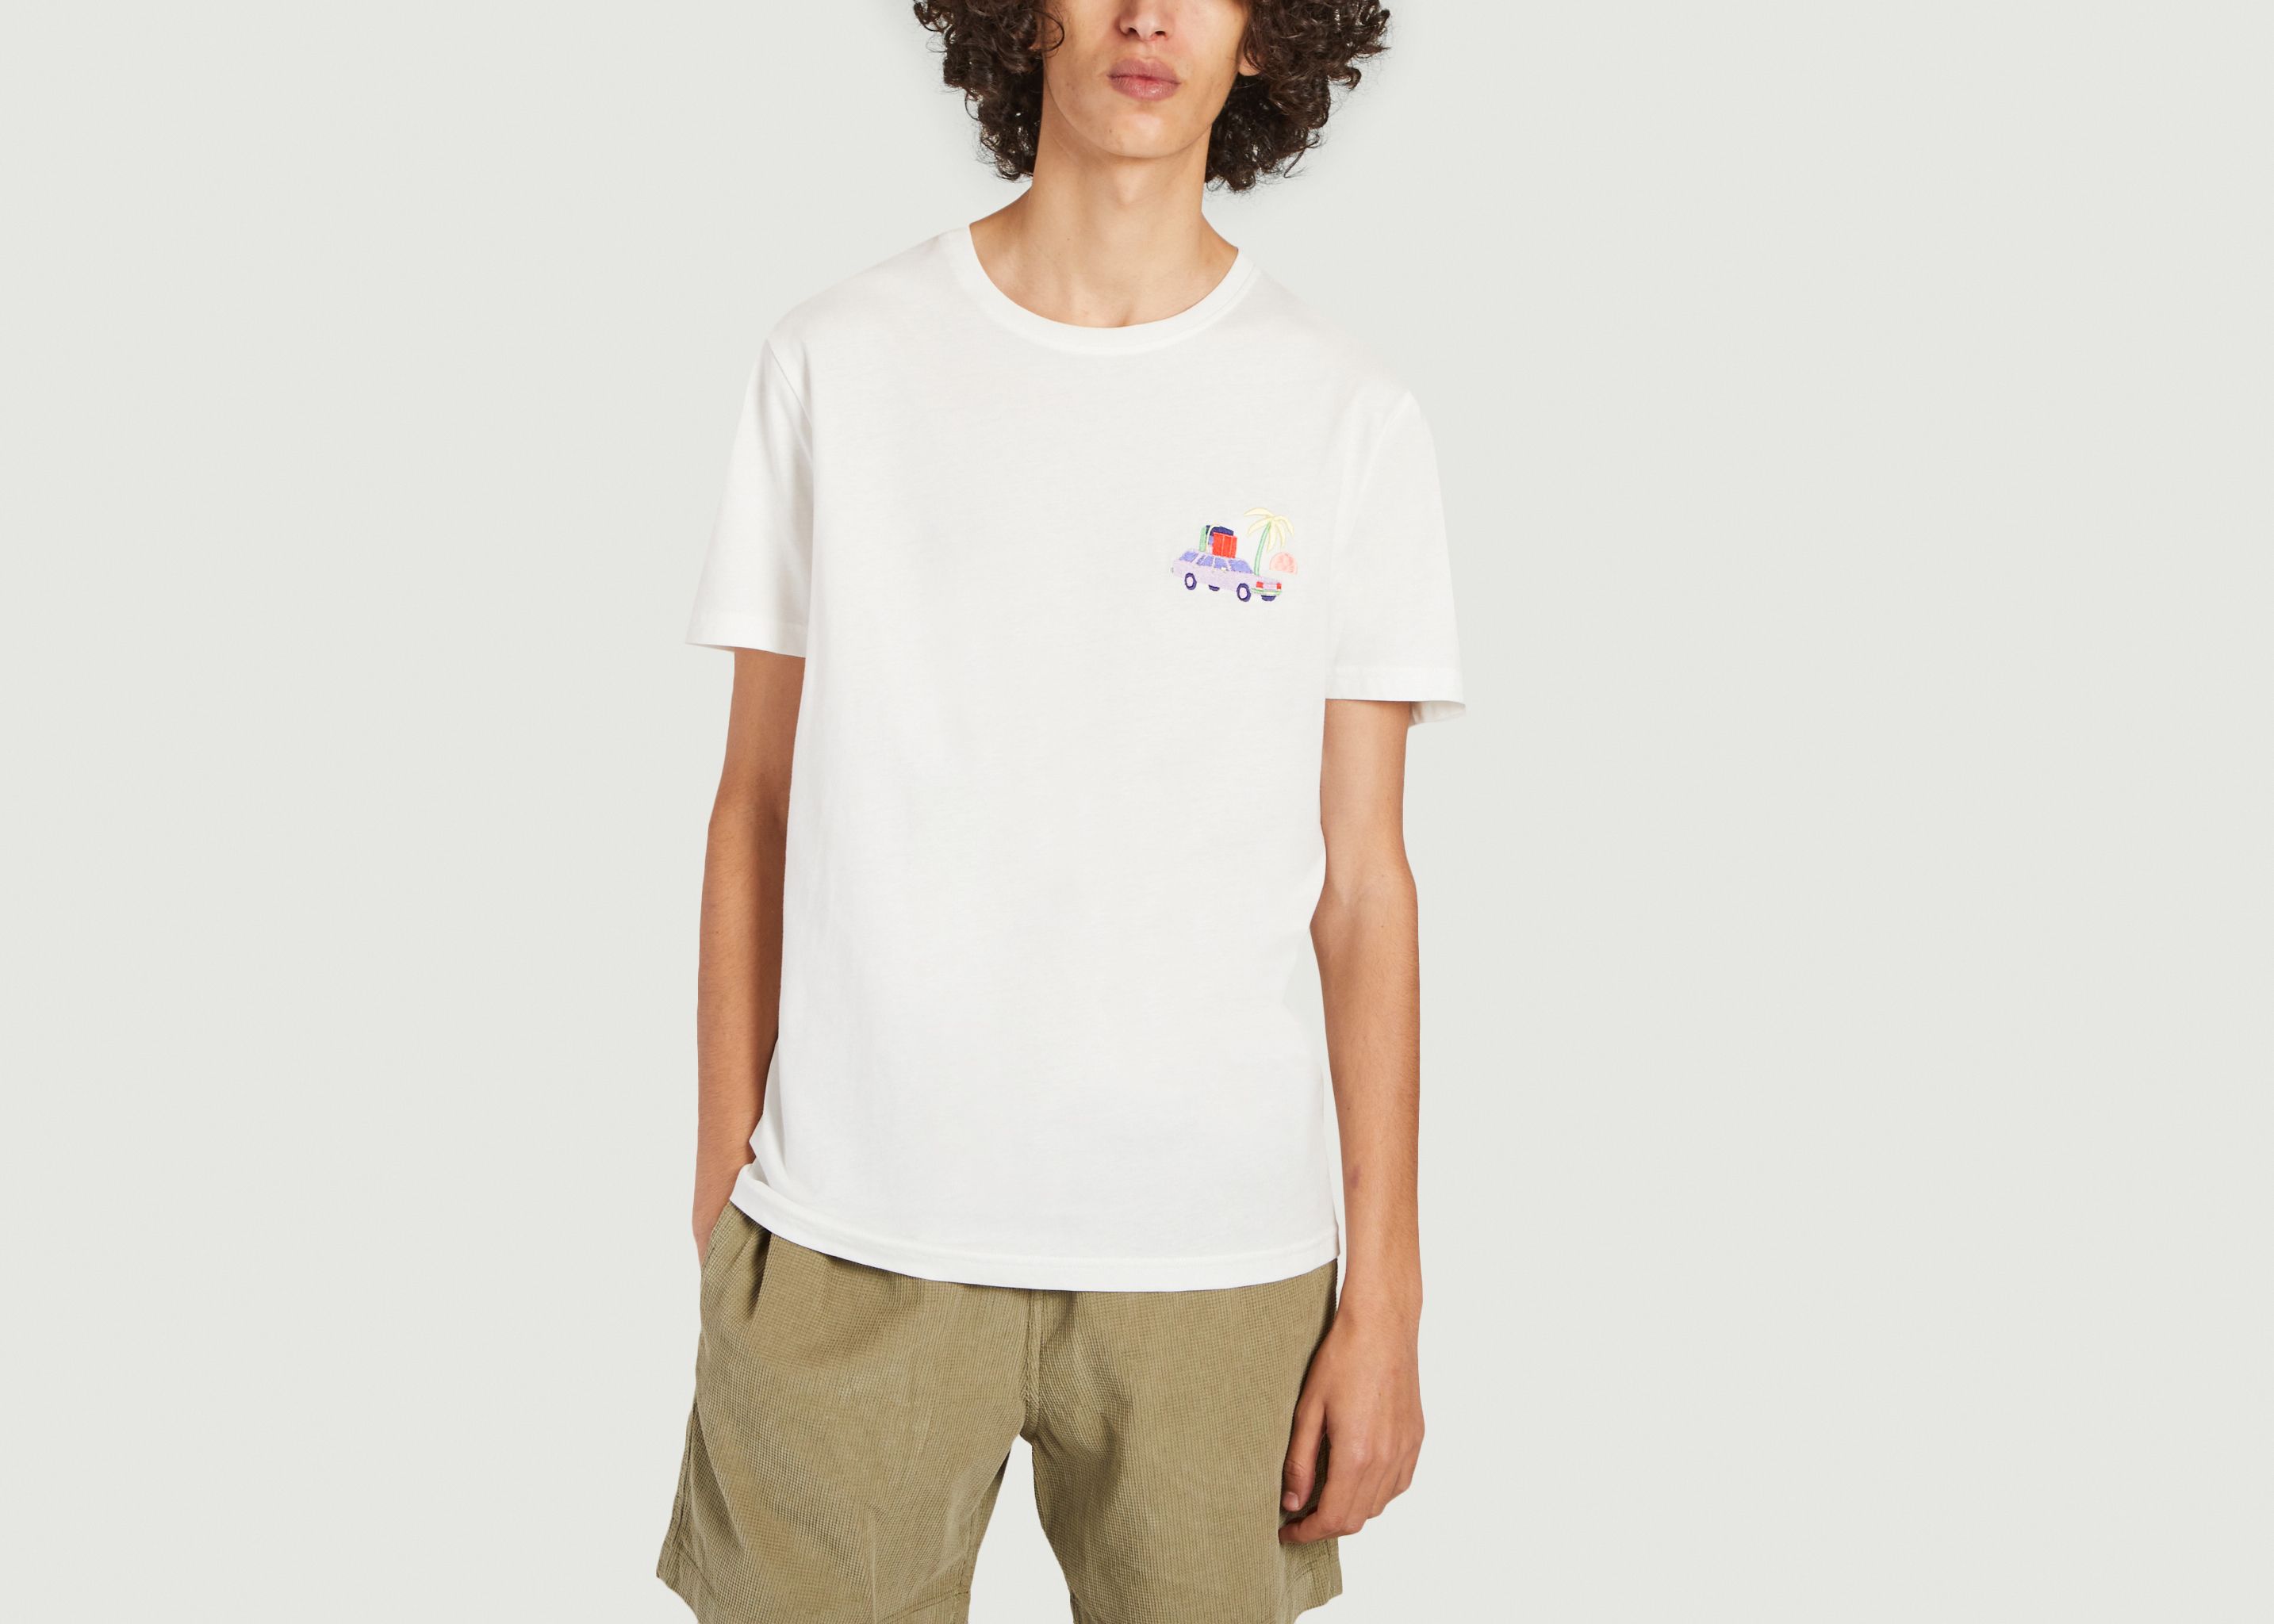 Organic cotton t-shirt embroidered with Tonton du bled x Elsa Martino - Olow